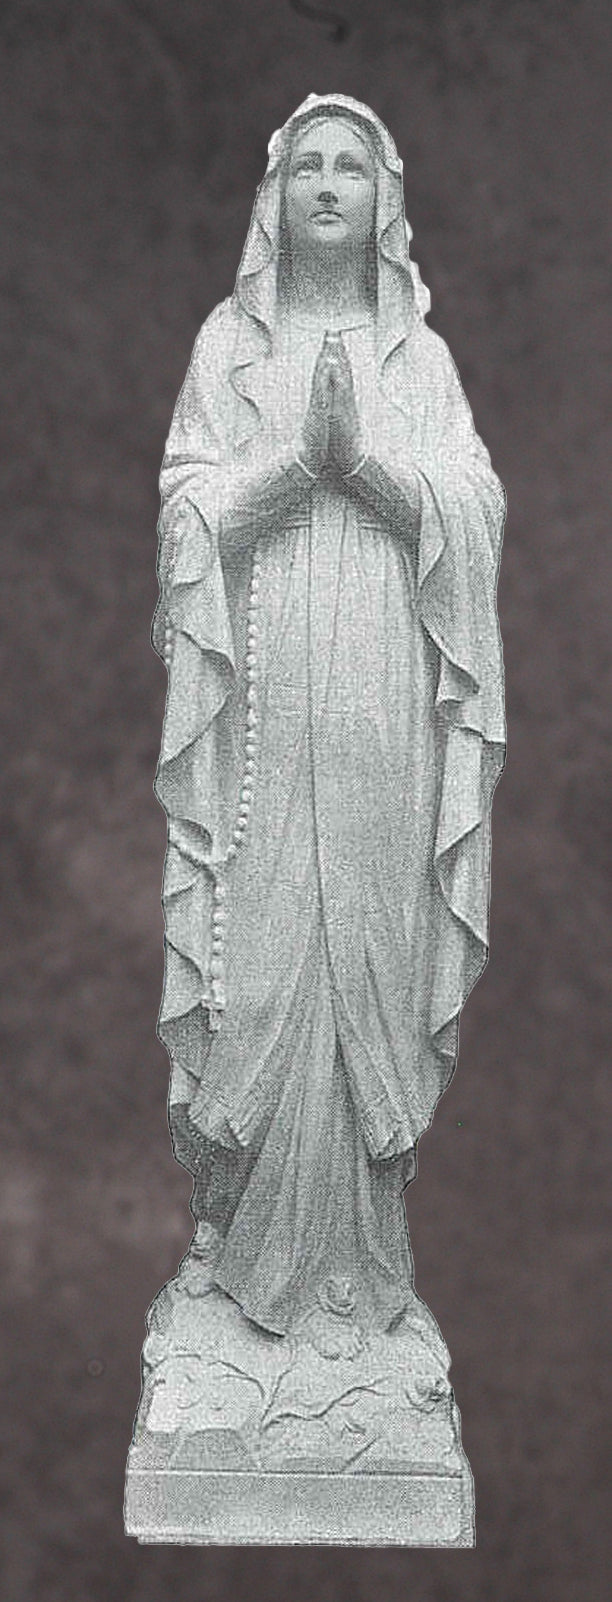 Our Lady of Lourdes Marble Statue Style 2 - 36”H